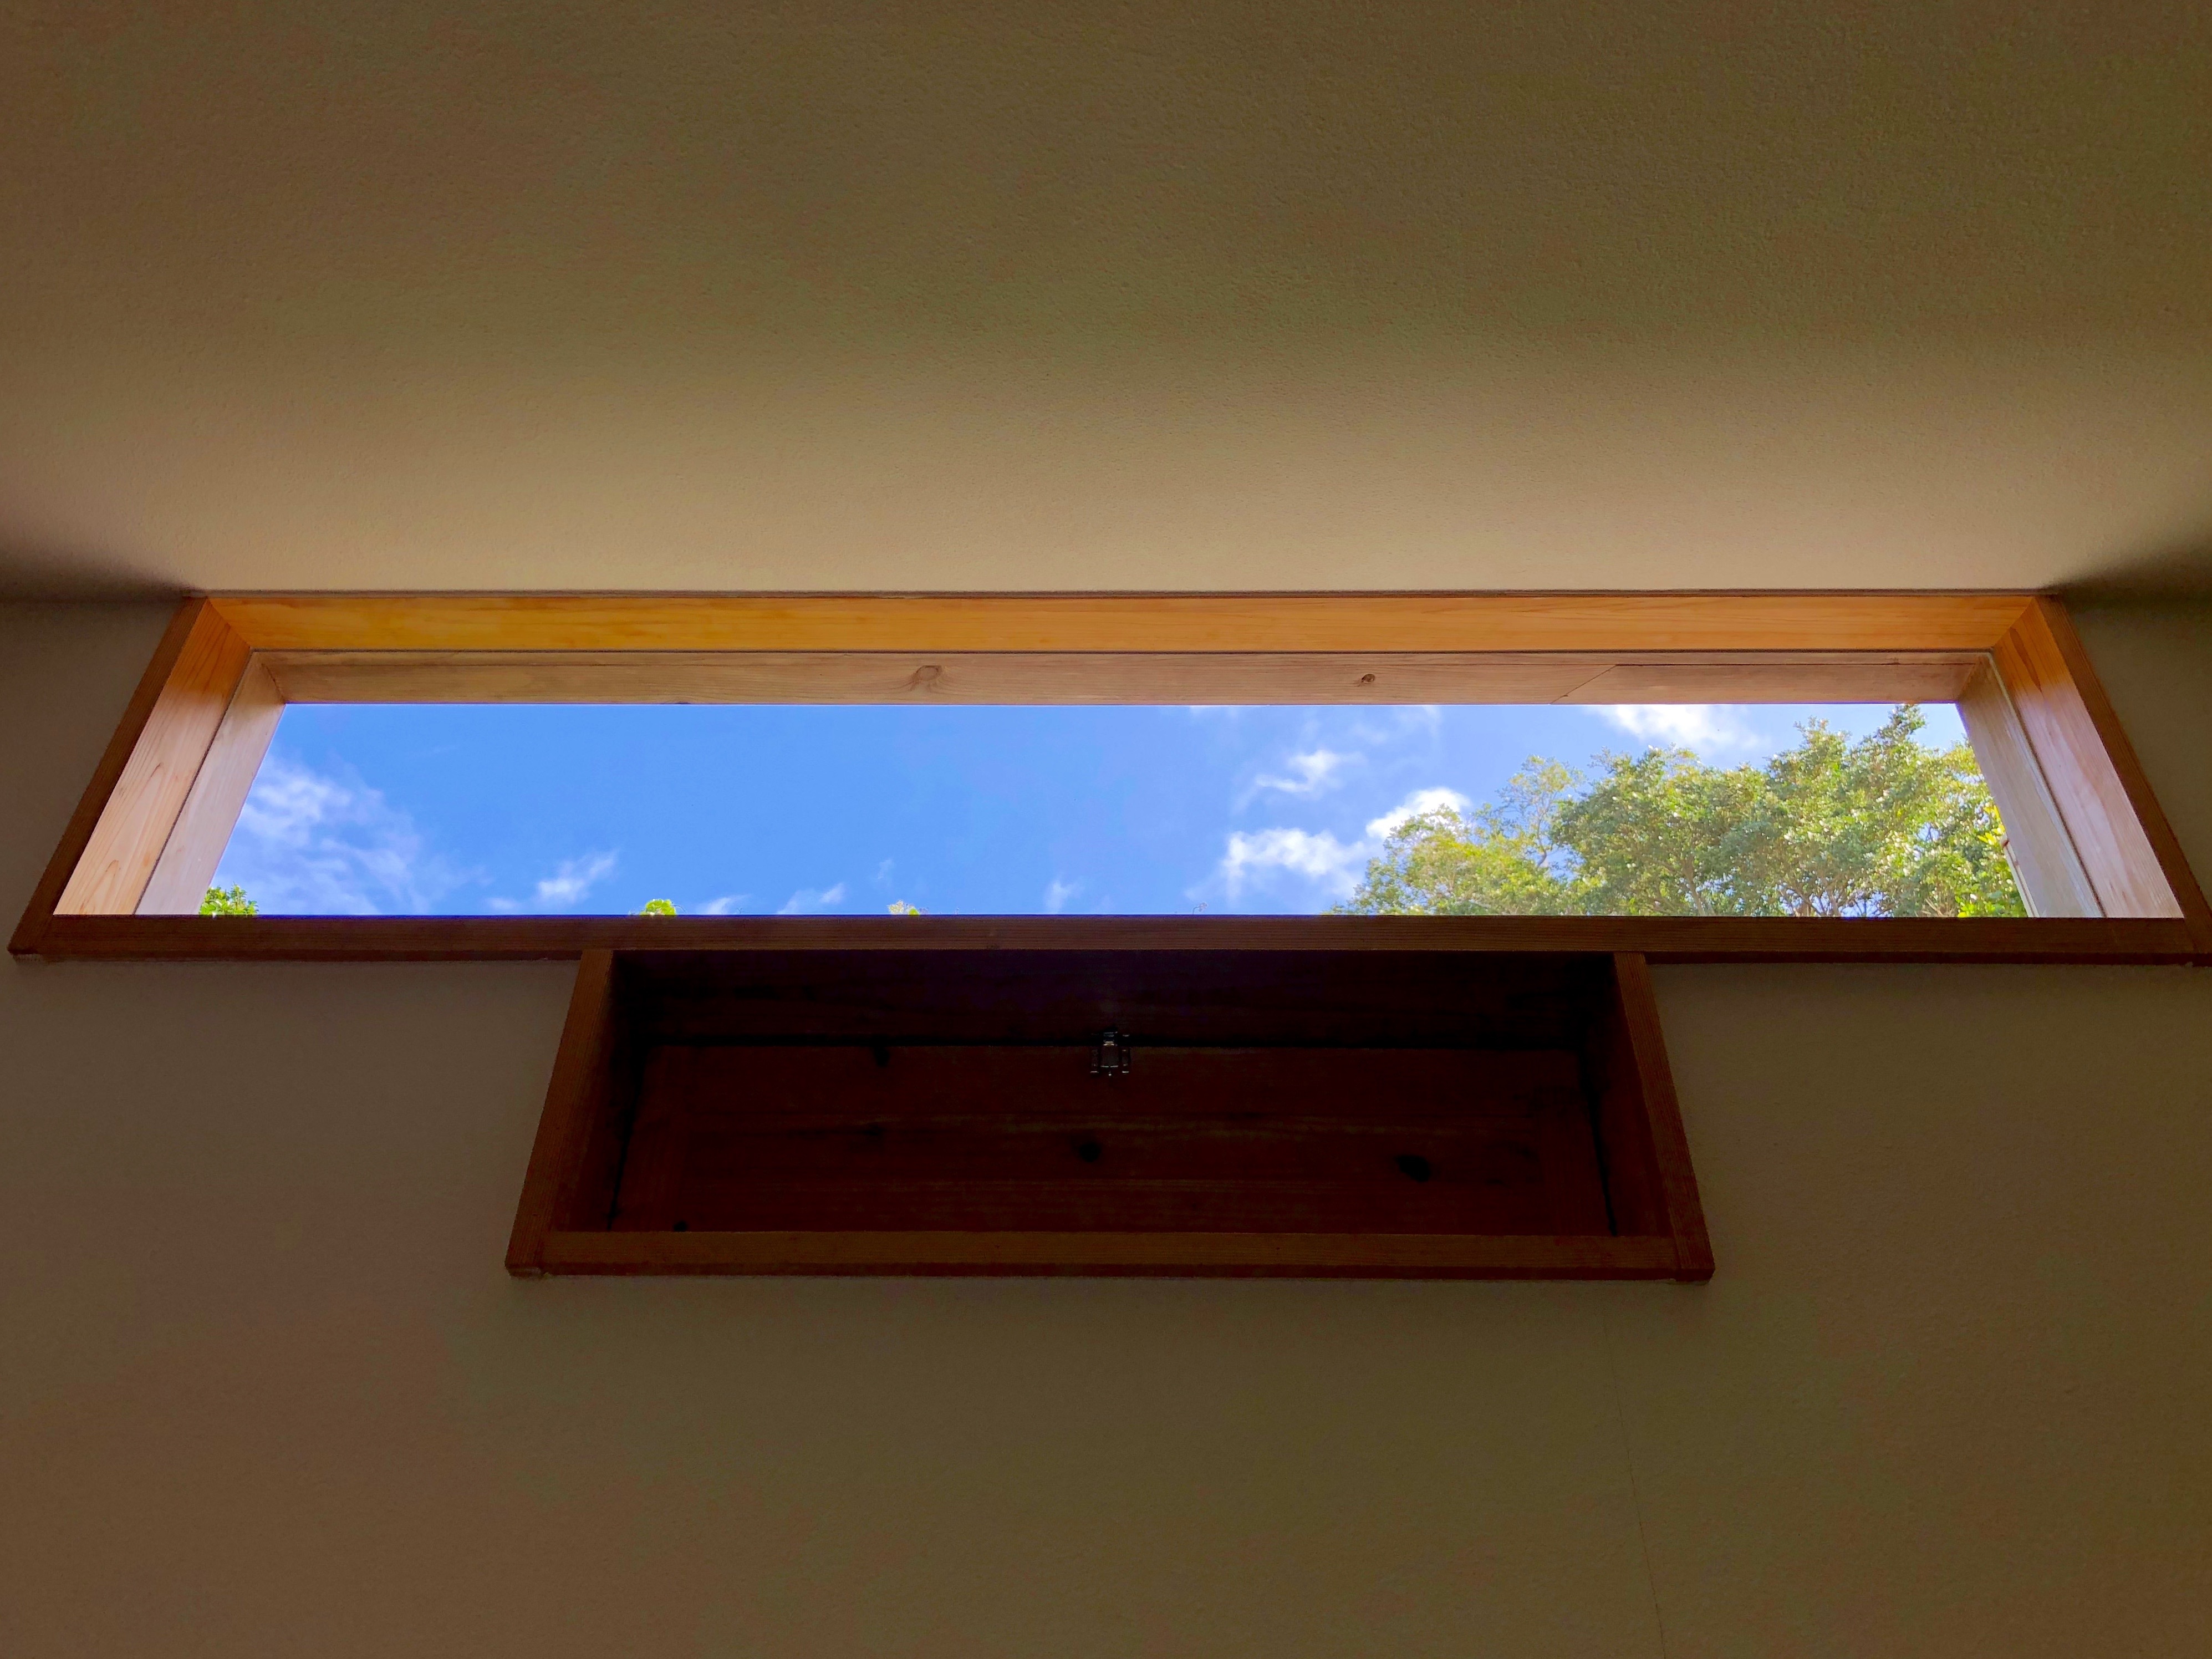 The sky seen from the skylight